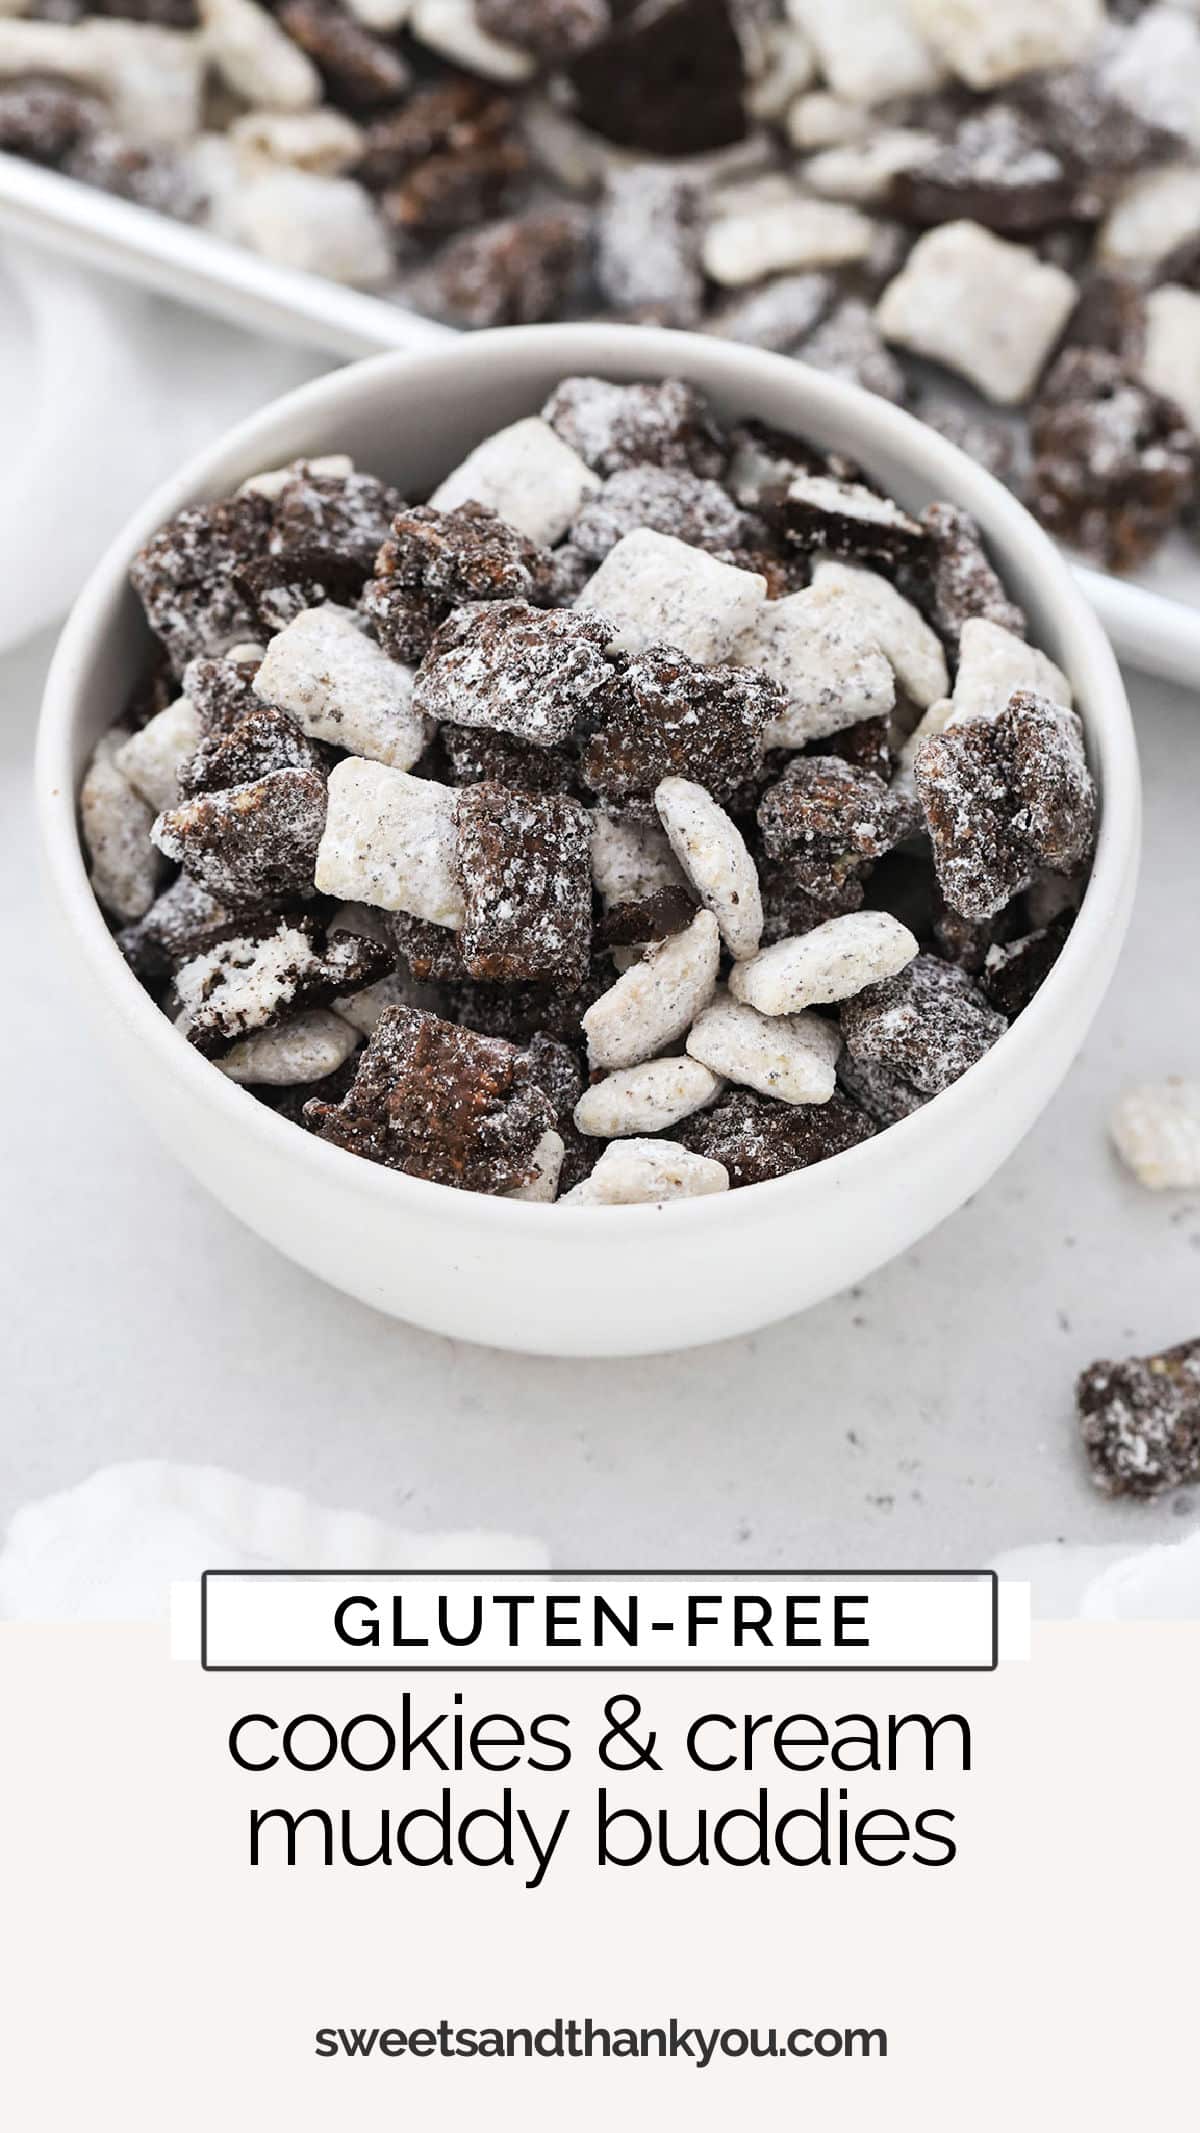 These cookies and cream oreo muddy buddies are such a fun spin on the classic! Plus, they’re as fun to make as they are to eat! / oreo chex mix / oreo puppy chow / cookies & cream chex mix / cookies & cream puppy chow / cookies & cream muddy buddies recipe / black and white chex mix / black and white puppy chow / black and white muddy buddies / gluten free muddy buddies recipe / gluten free oreo dessert / no bake dessert